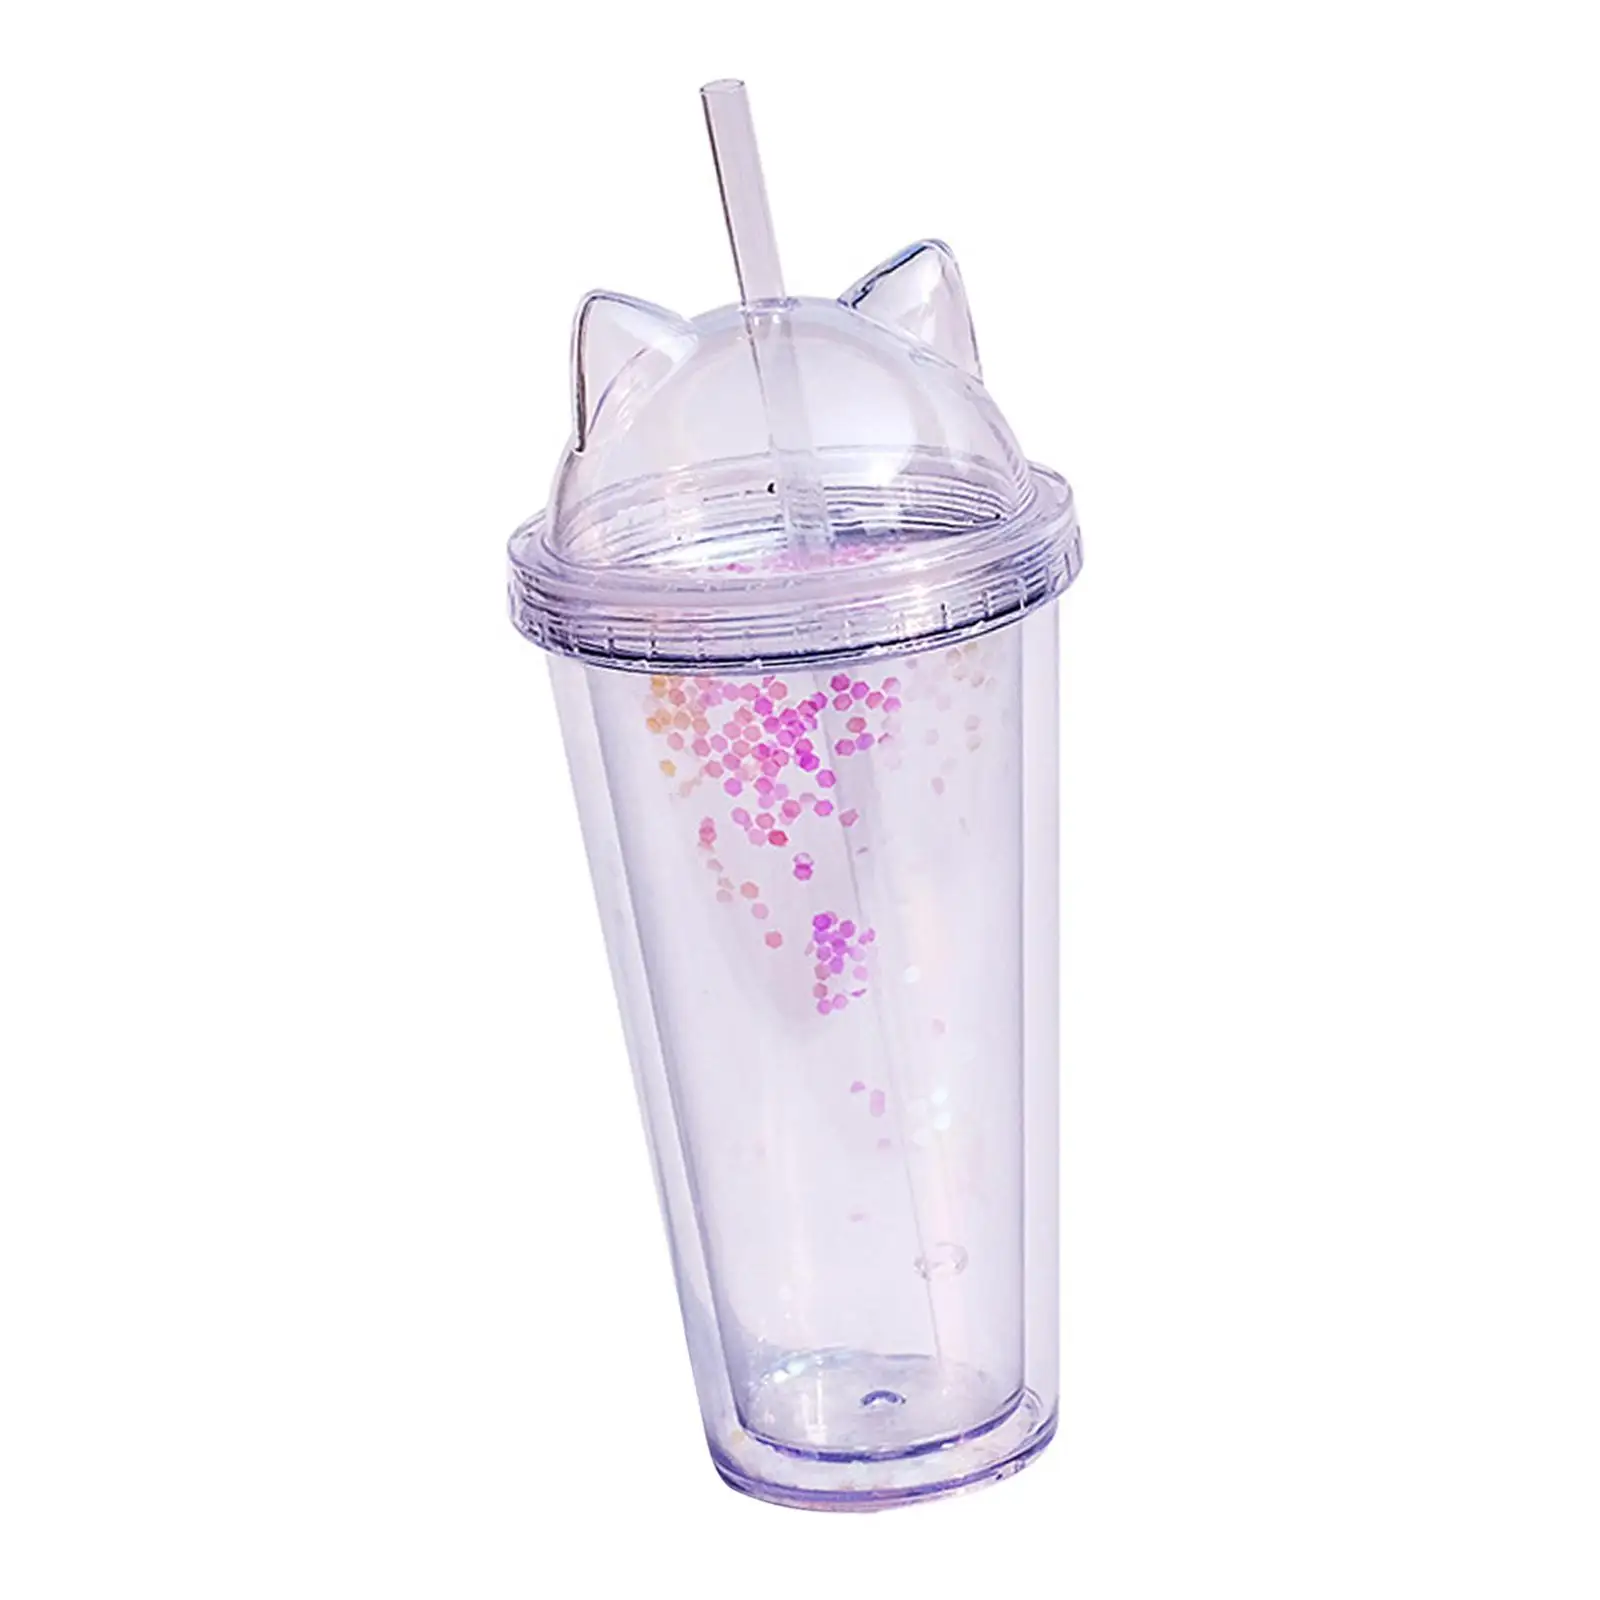 Insulated  Tumbler Cup Shiny Simple with Straw & Lid Drinkware Water Bottle Reusable for outdoor Shopping Tea Hot and Cold